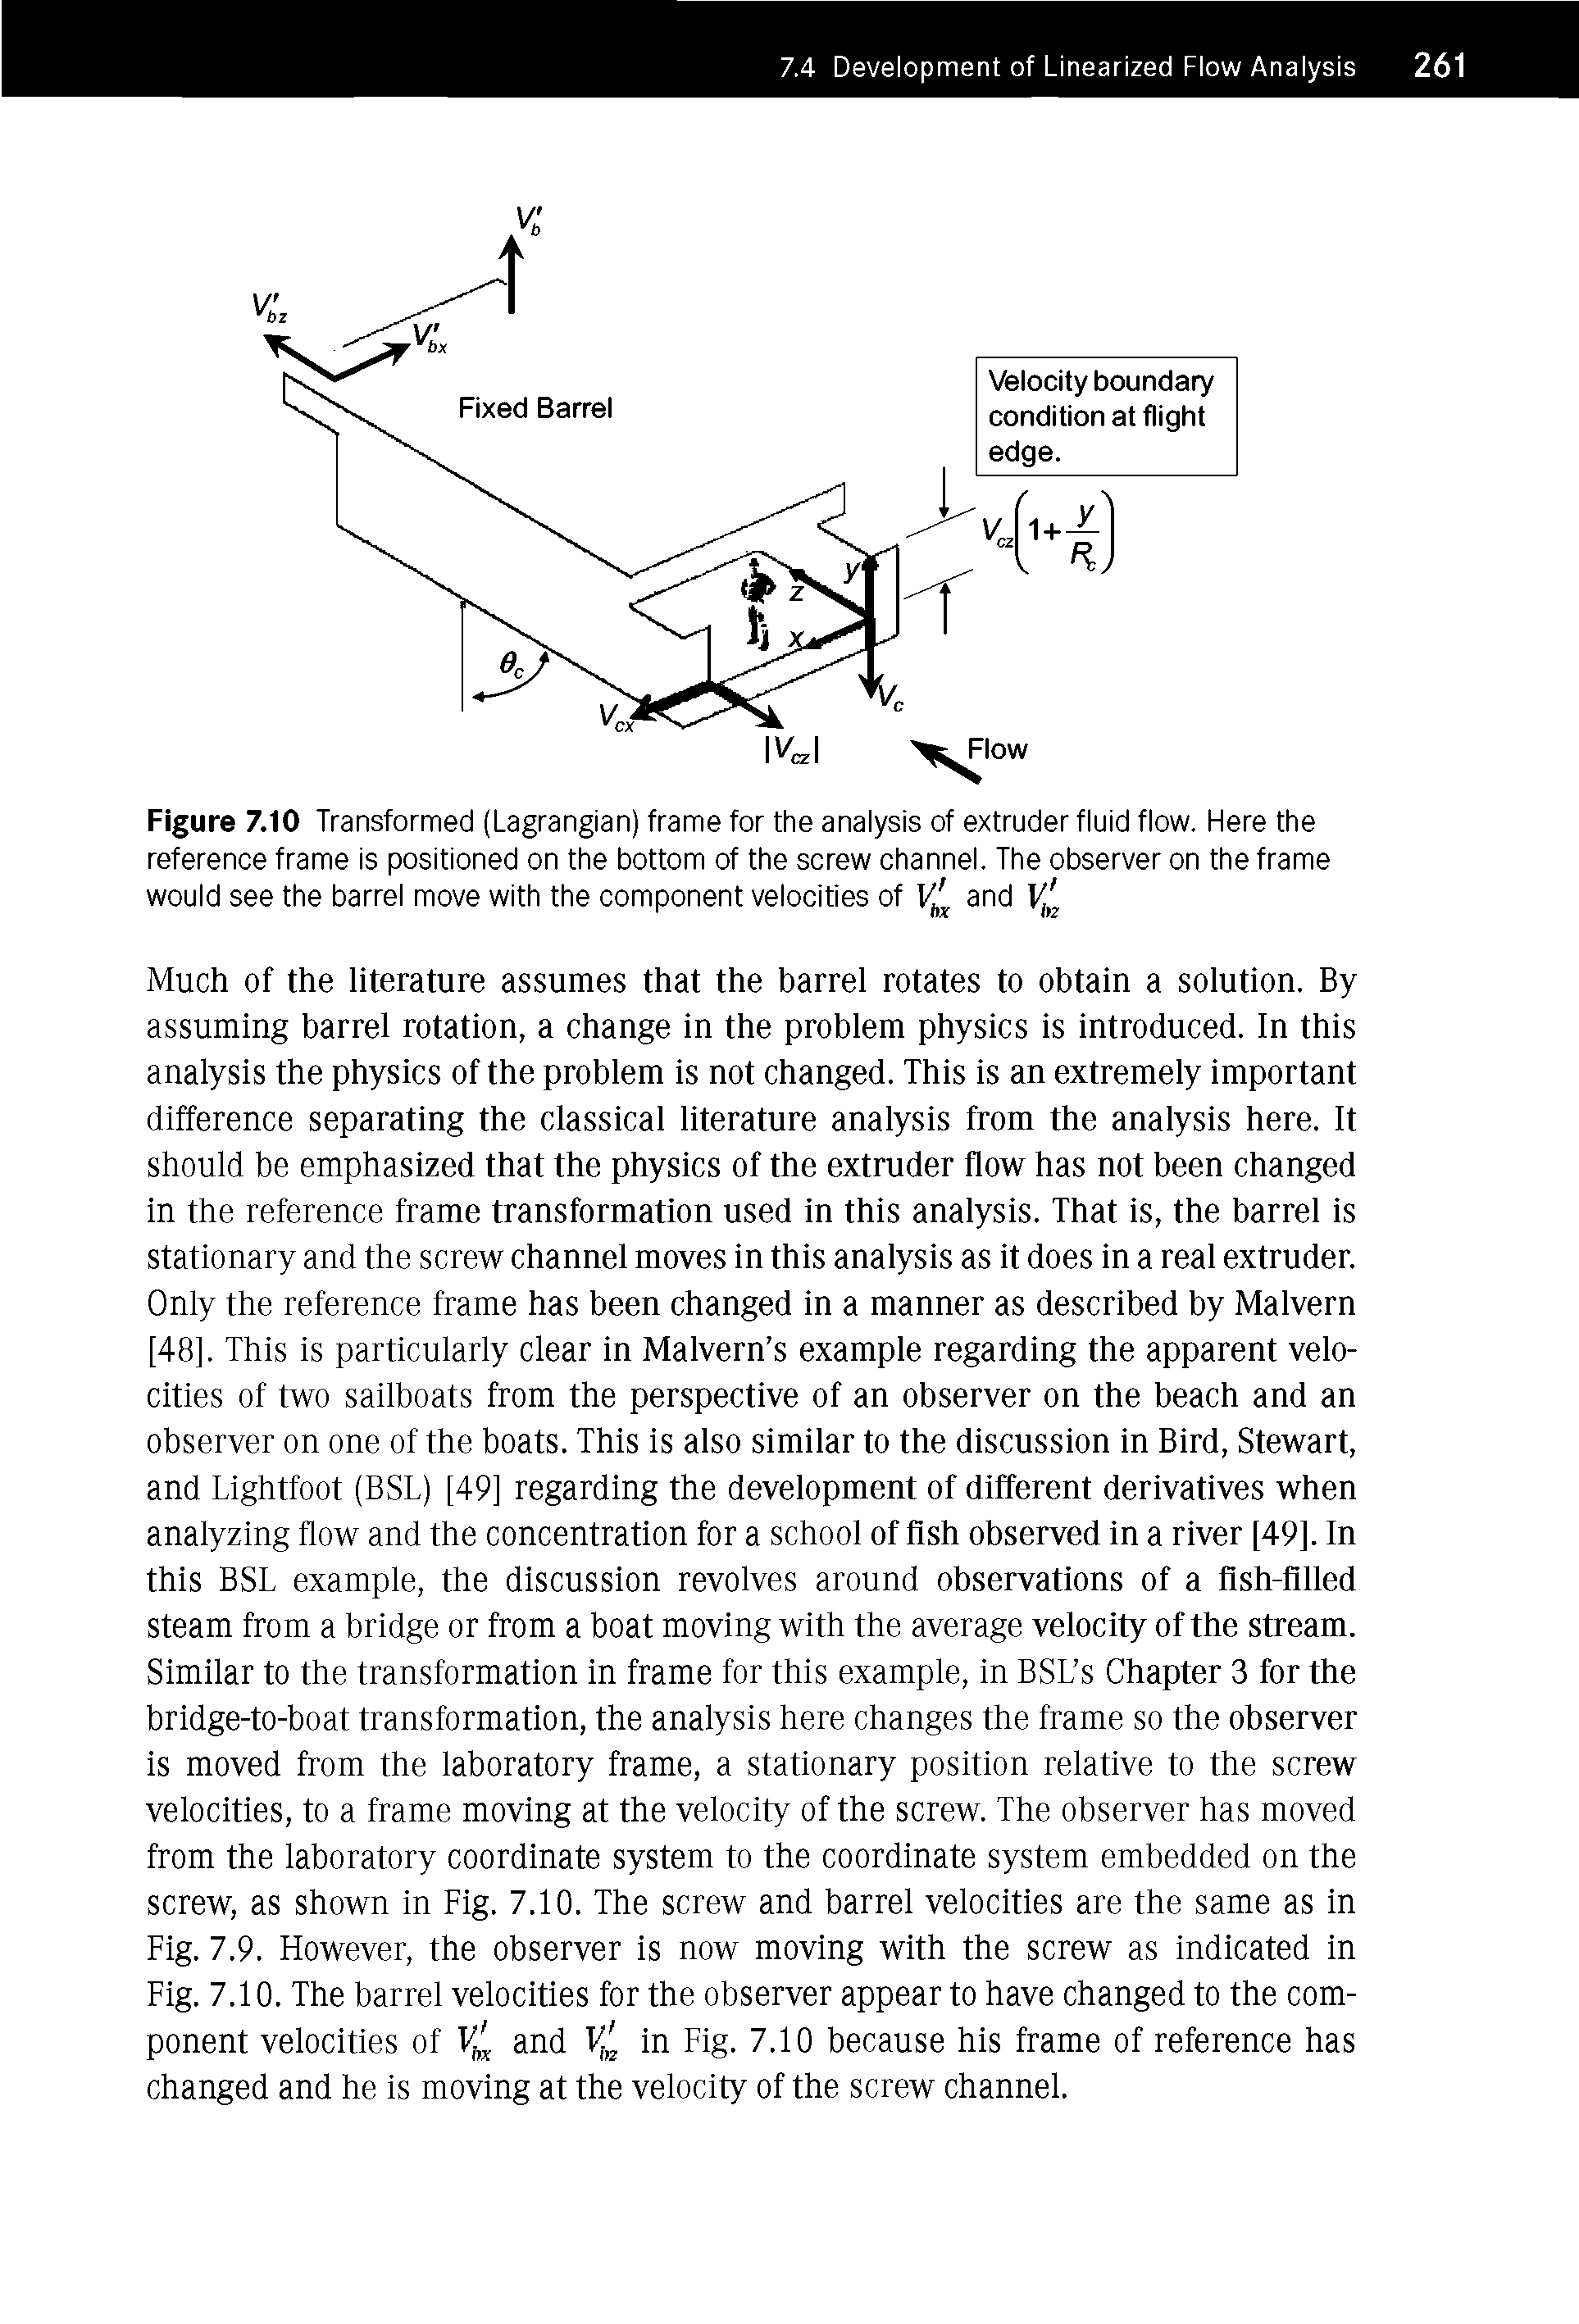 Figure 7.10 Transformed (Lagrangian) frame for the analysis of extruder fluid flow. Here the reference frame is positioned on the bottom of the screw channel. The observer on the frame would see the barrel move with the component velocities of and V, ...